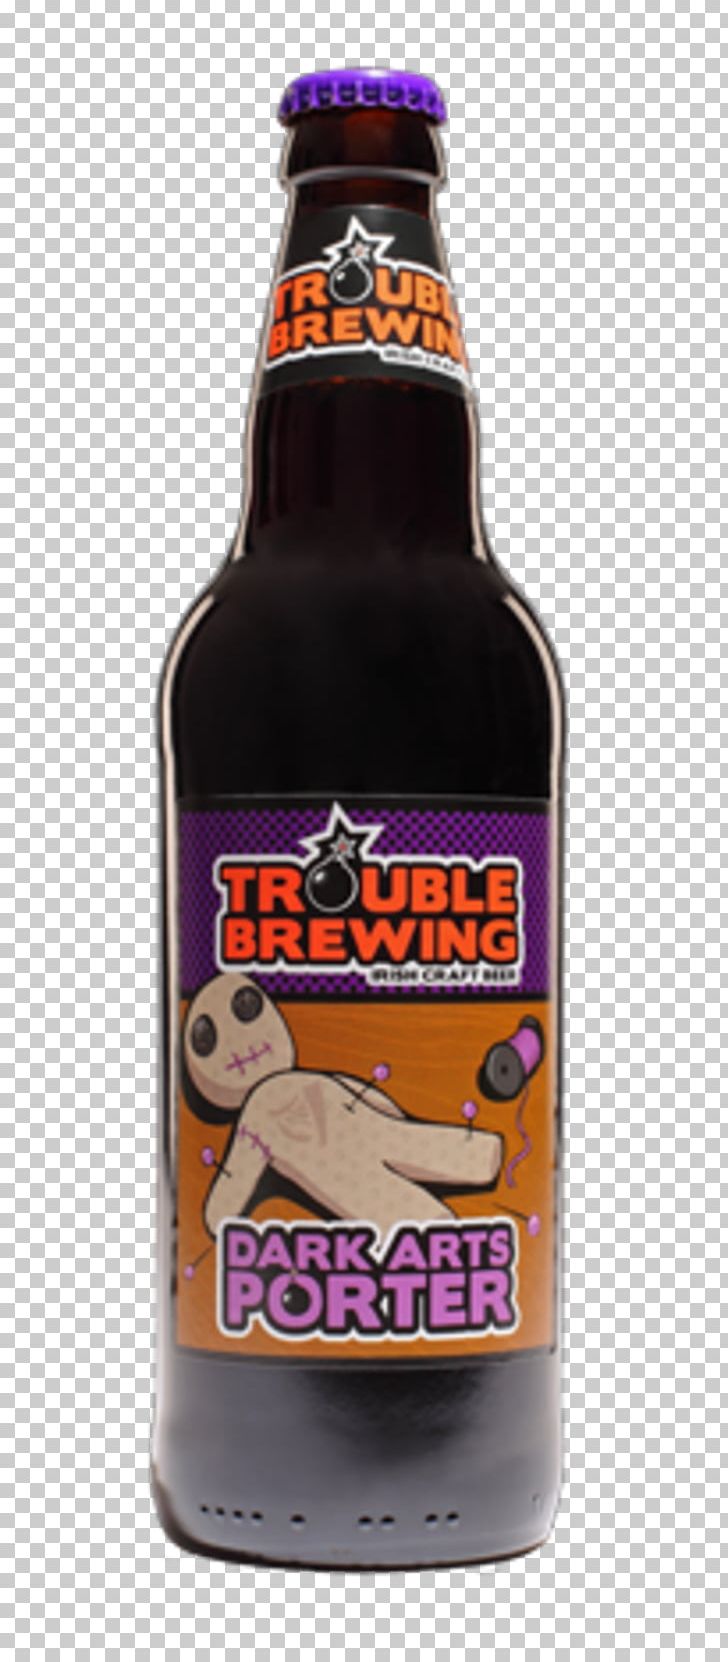 Beer Bottle Porter Trouble Brewing Beer Brewing Grains & Malts PNG, Clipart, Alcoholic Beverage, Battle Of Polytopia, Beer, Beer Bottle, Beer Brewing Grains Malts Free PNG Download